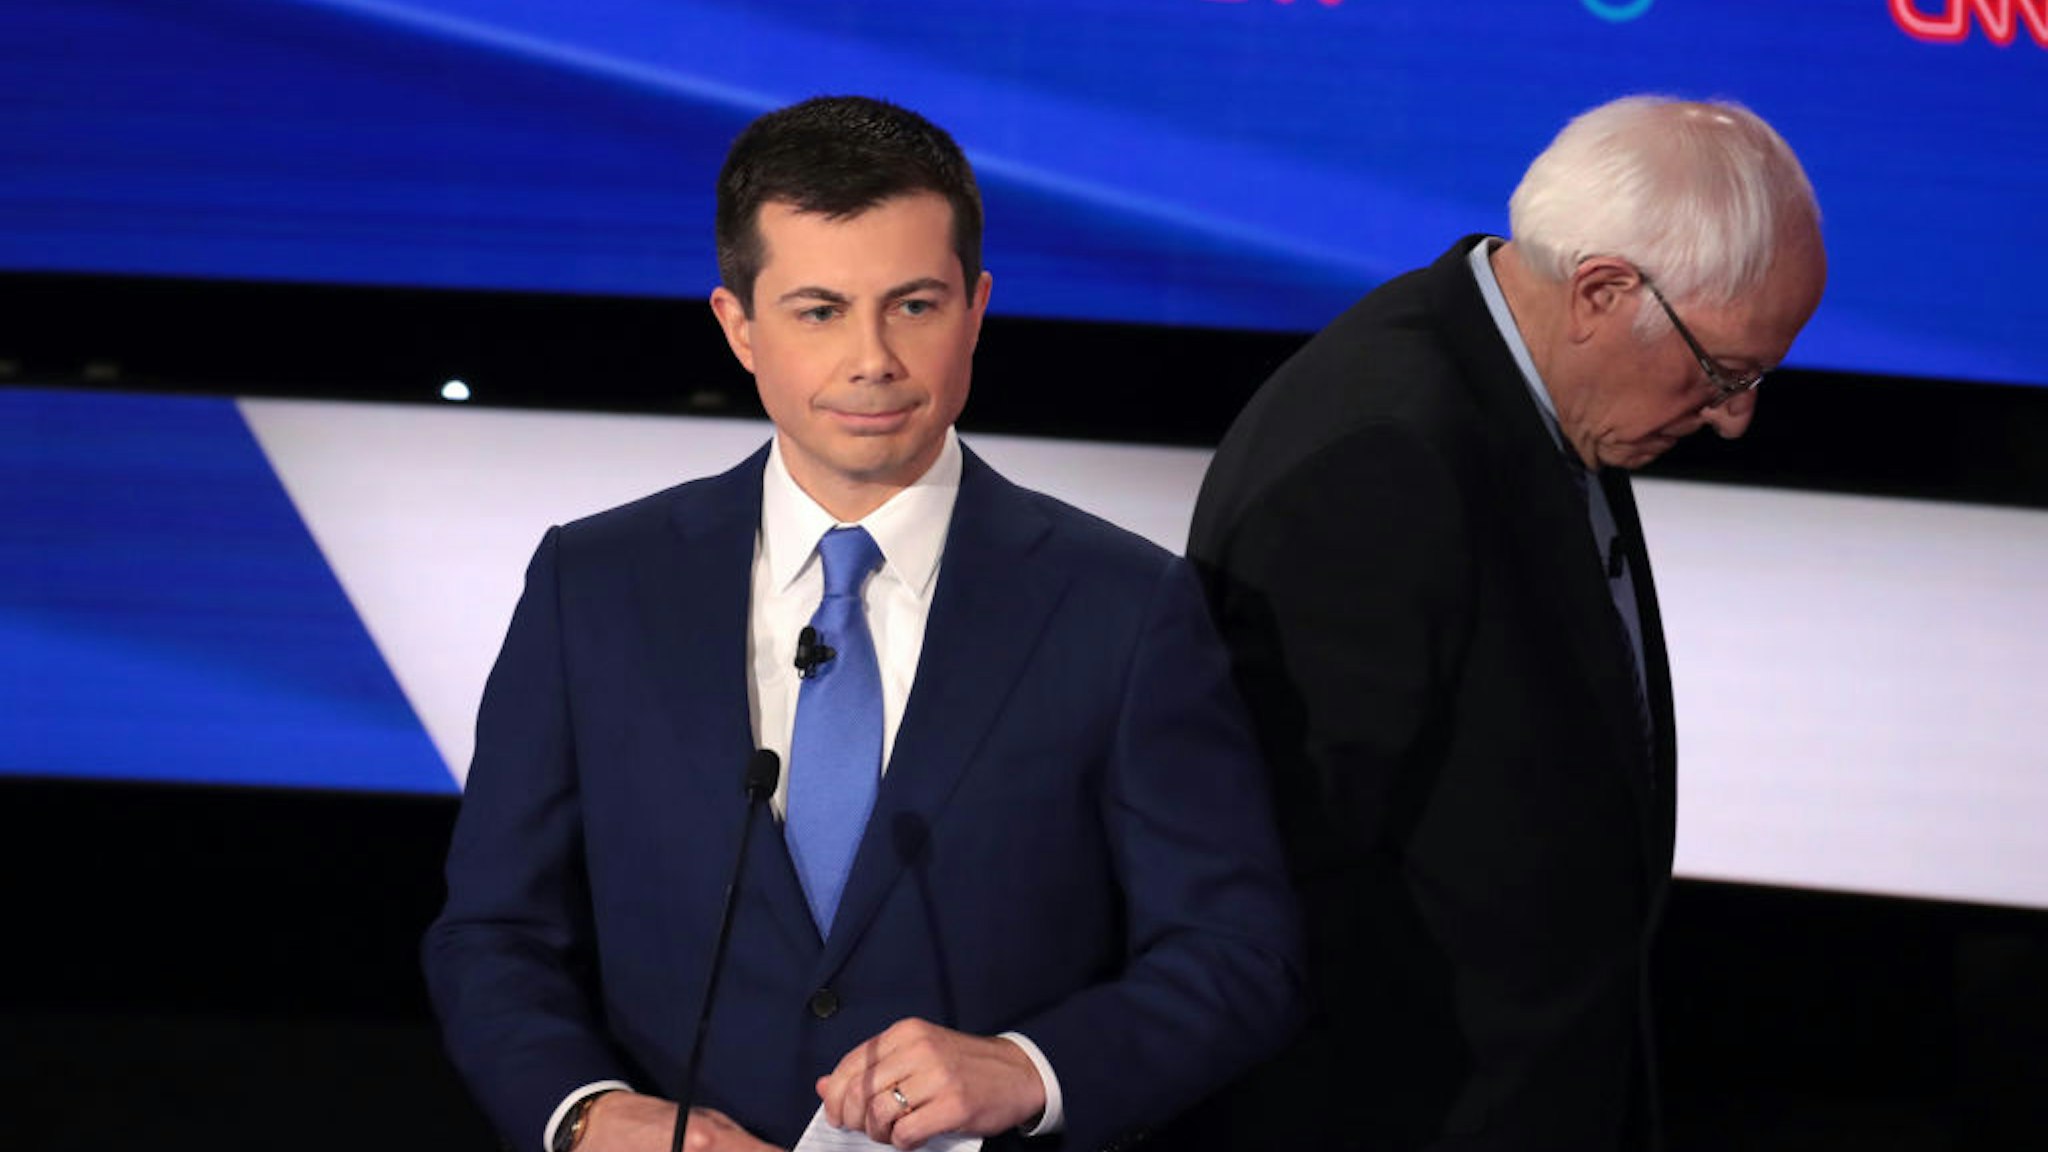 Former South Bend, Indiana Mayor Pete Buttigieg (C) and Sen. Bernie Sanders (I-VT) take a break during the Democratic presidential primary debate at Drake University on January 14, 2020 in Des Moines, Iowa.